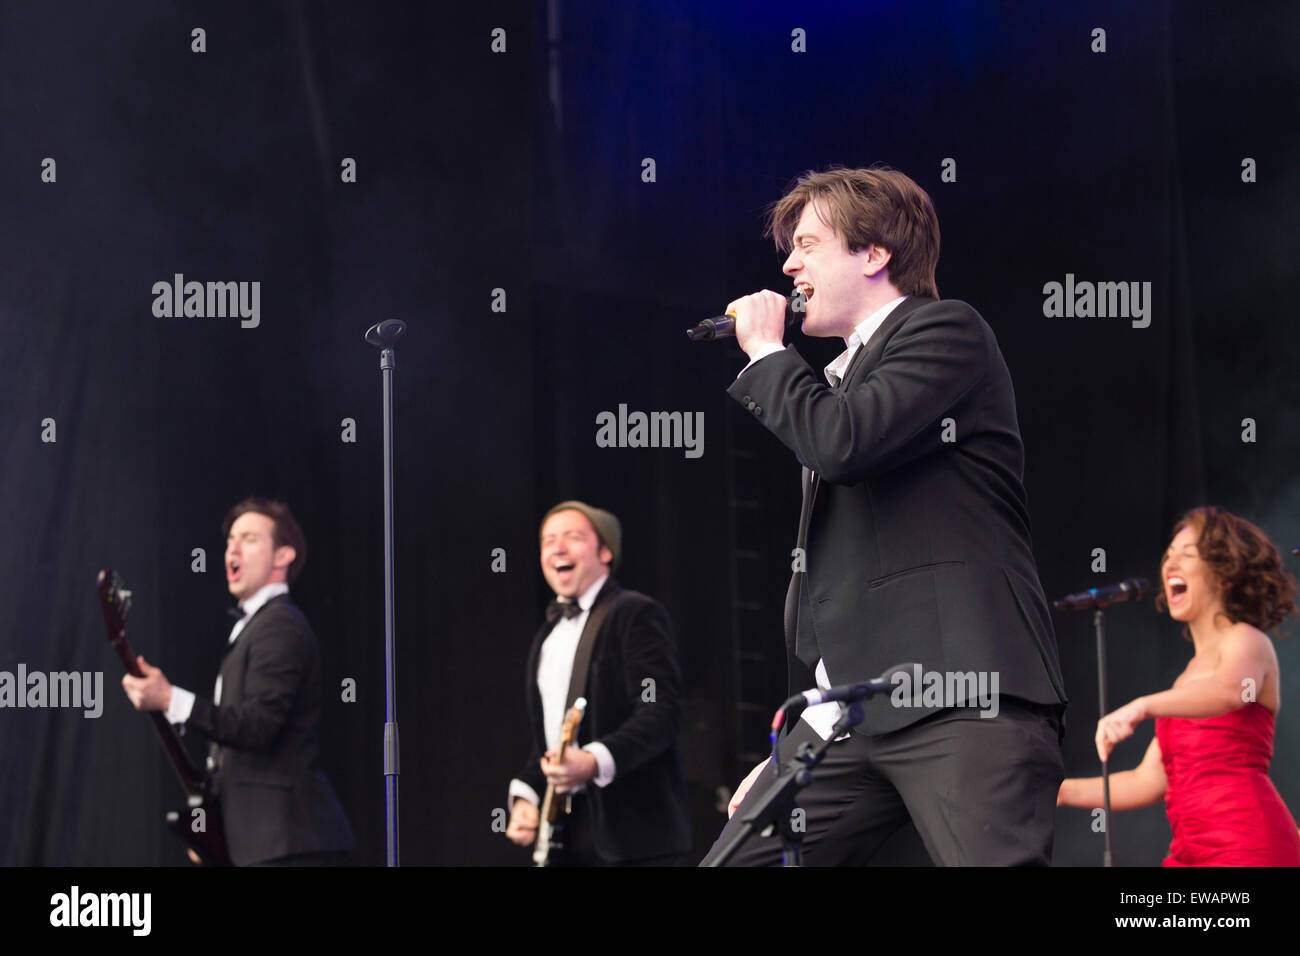 London, UK. 21 June 2015. Stars from the hit musical The Commitments perform at West End Live 2015 in Trafalgar Square. Pictured: singer Brian Gilligan. Credit:  Nick Savage/Alamy Live News Stock Photo